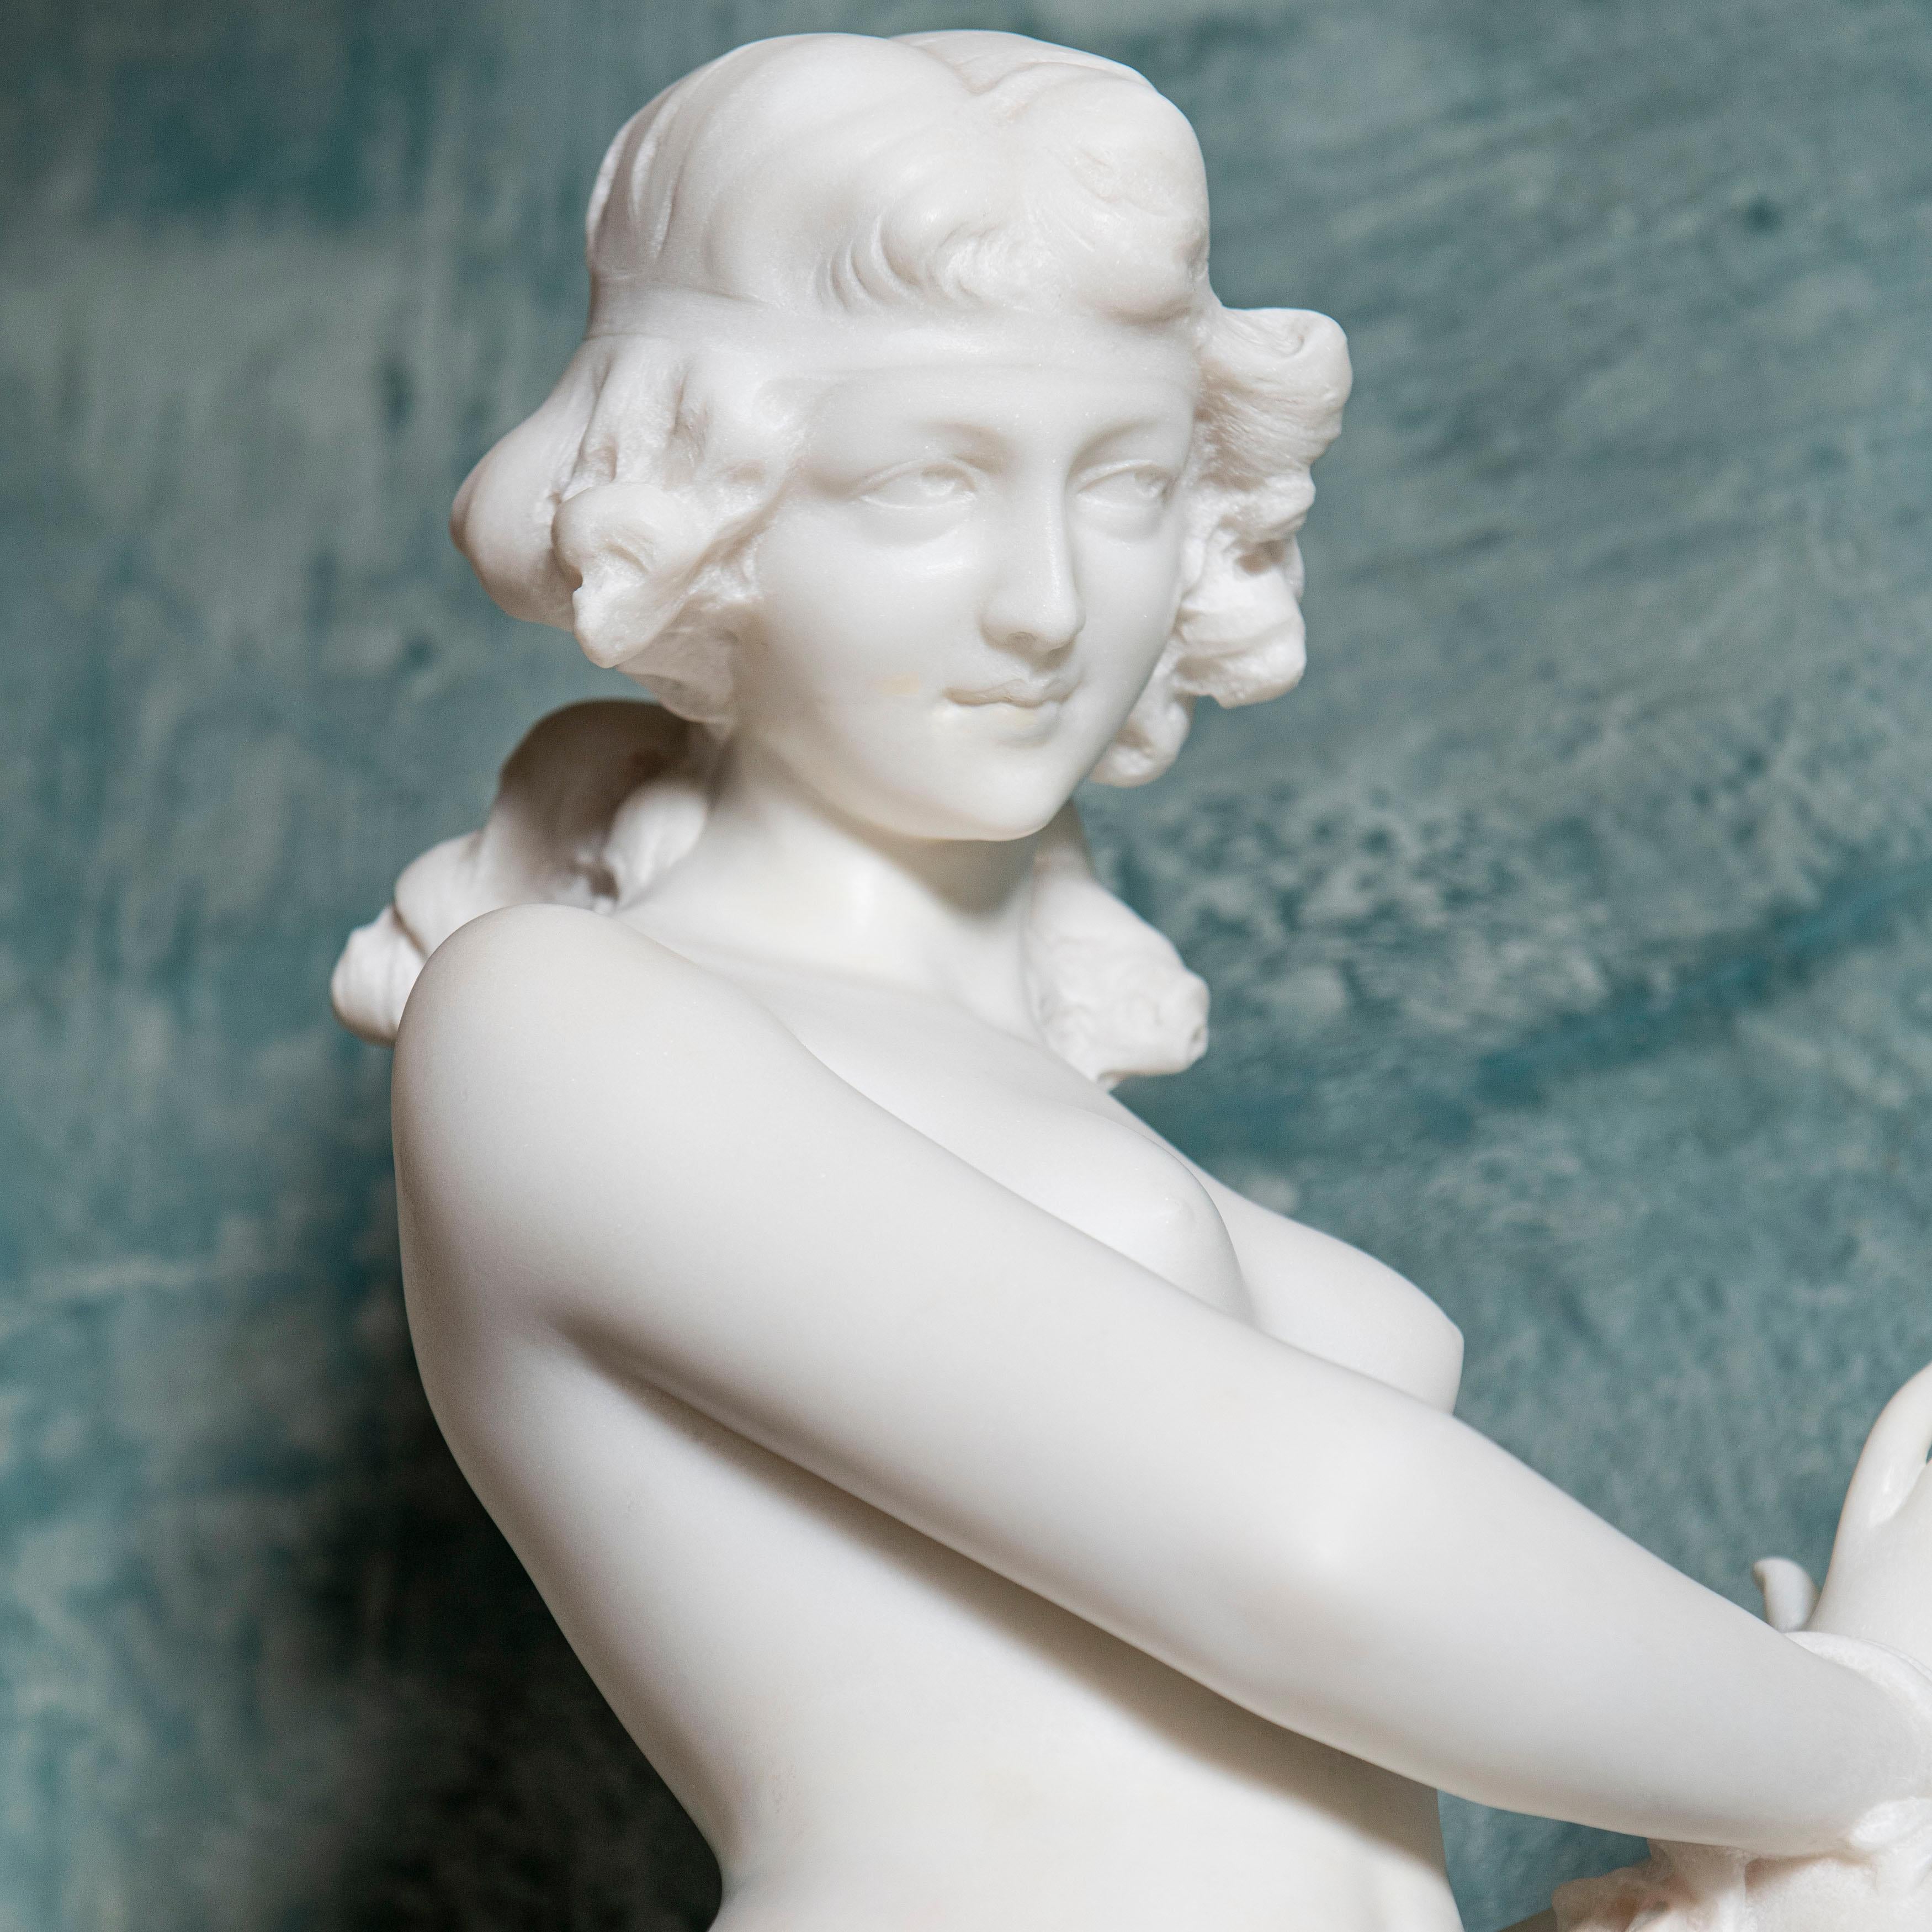 Carrara Marble Sculpture Signed A. Batacchi, Italy, Florence, Late 19th Century For Sale 1